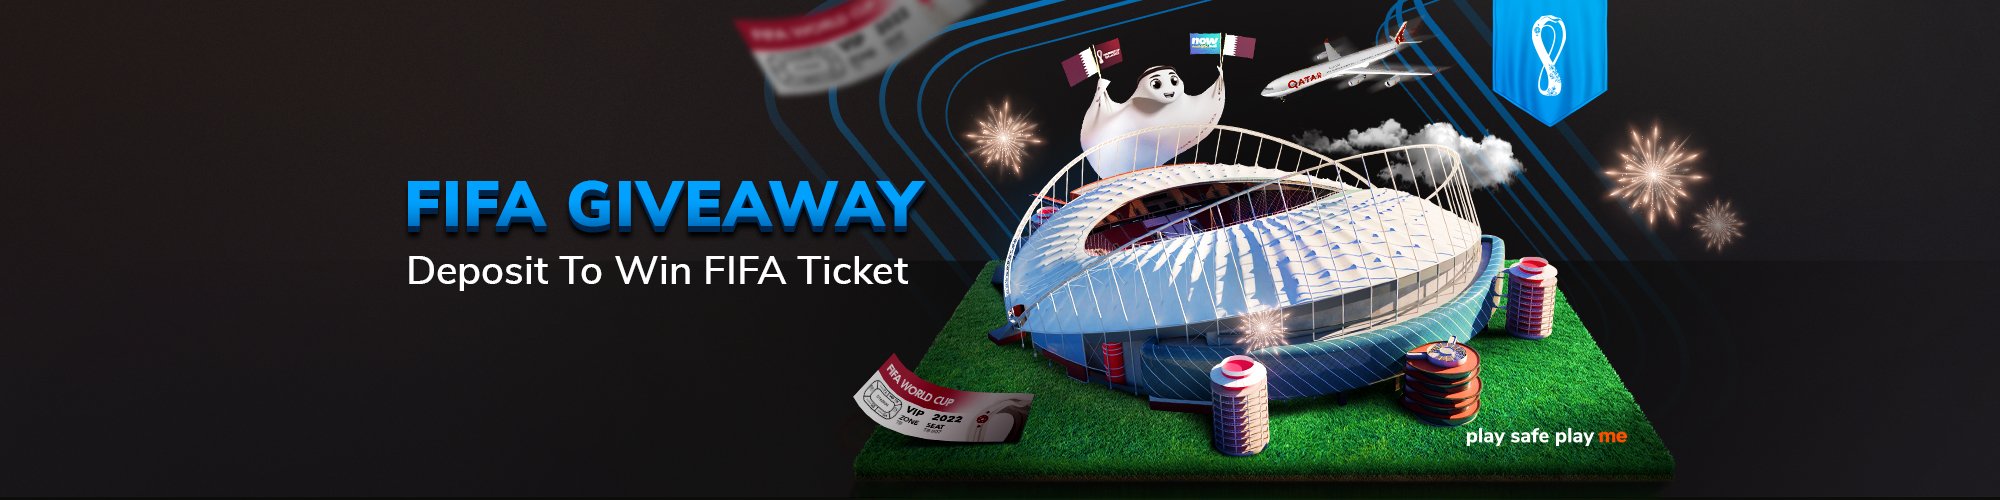 me88-FIFA-Giveaway-Deposit-To-Win-FIFA-Ticket